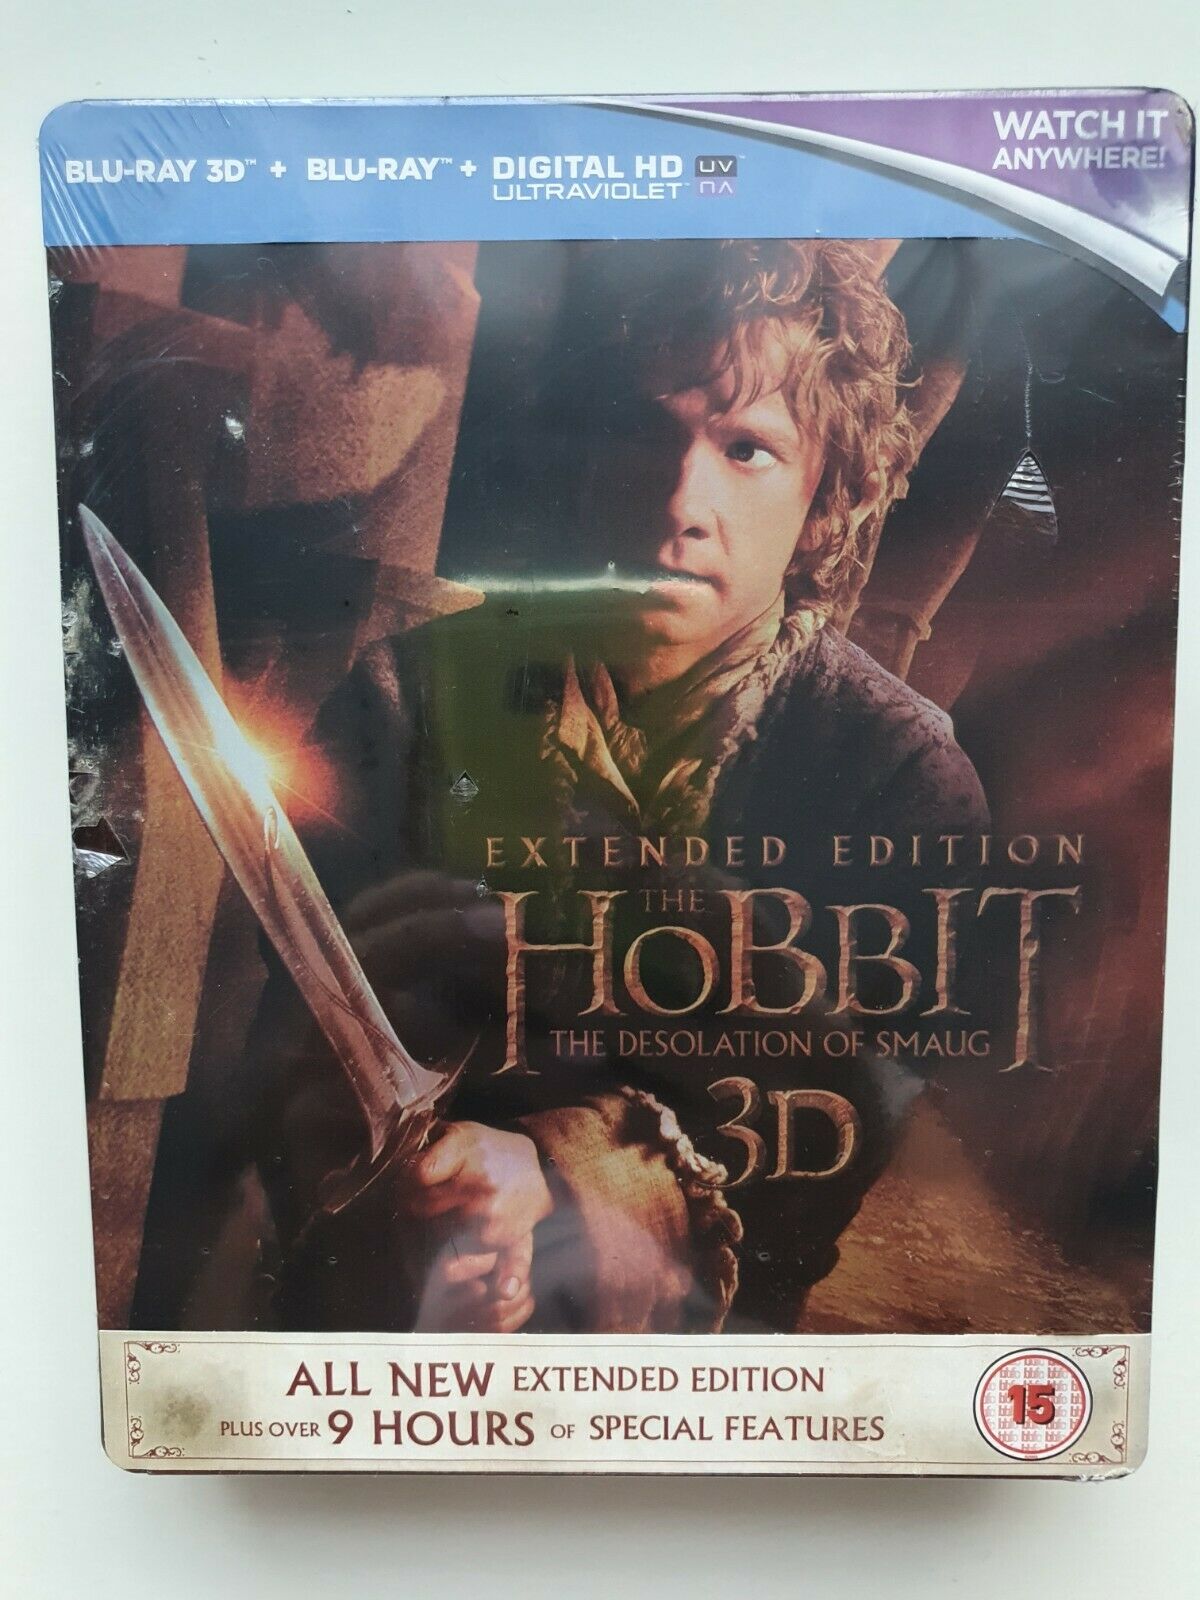 5051892176415 The Hobbit The Desolation of Smaug 3D Blu-ray Extended Ed. STEELBOOK NEW SEALED